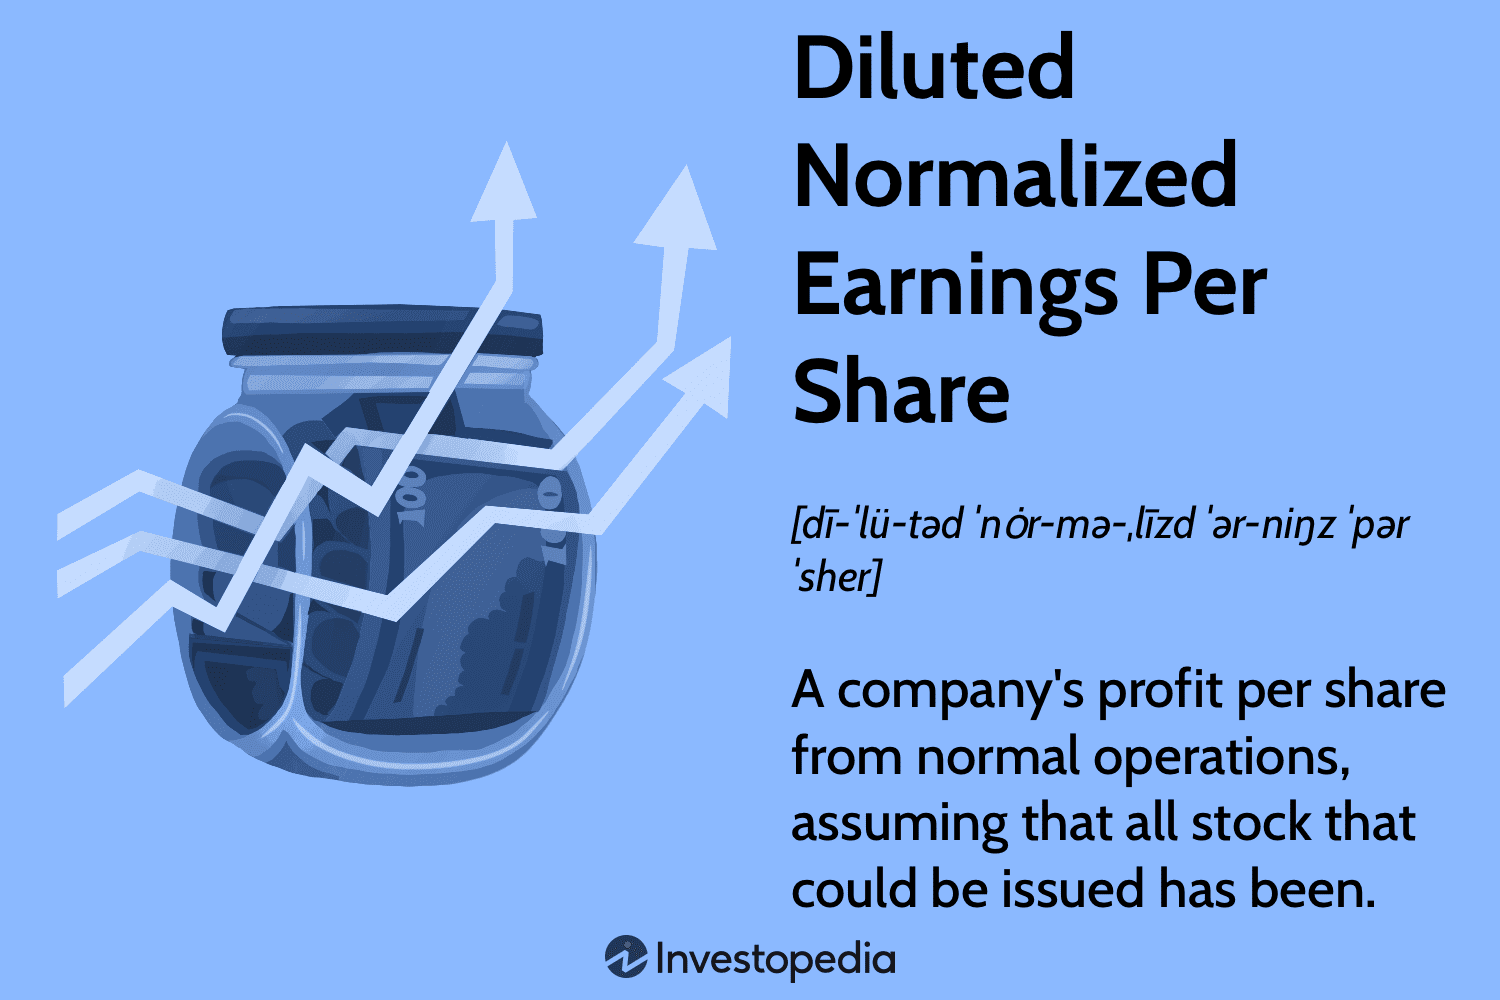 Diluted Normalized Earnings Per Share